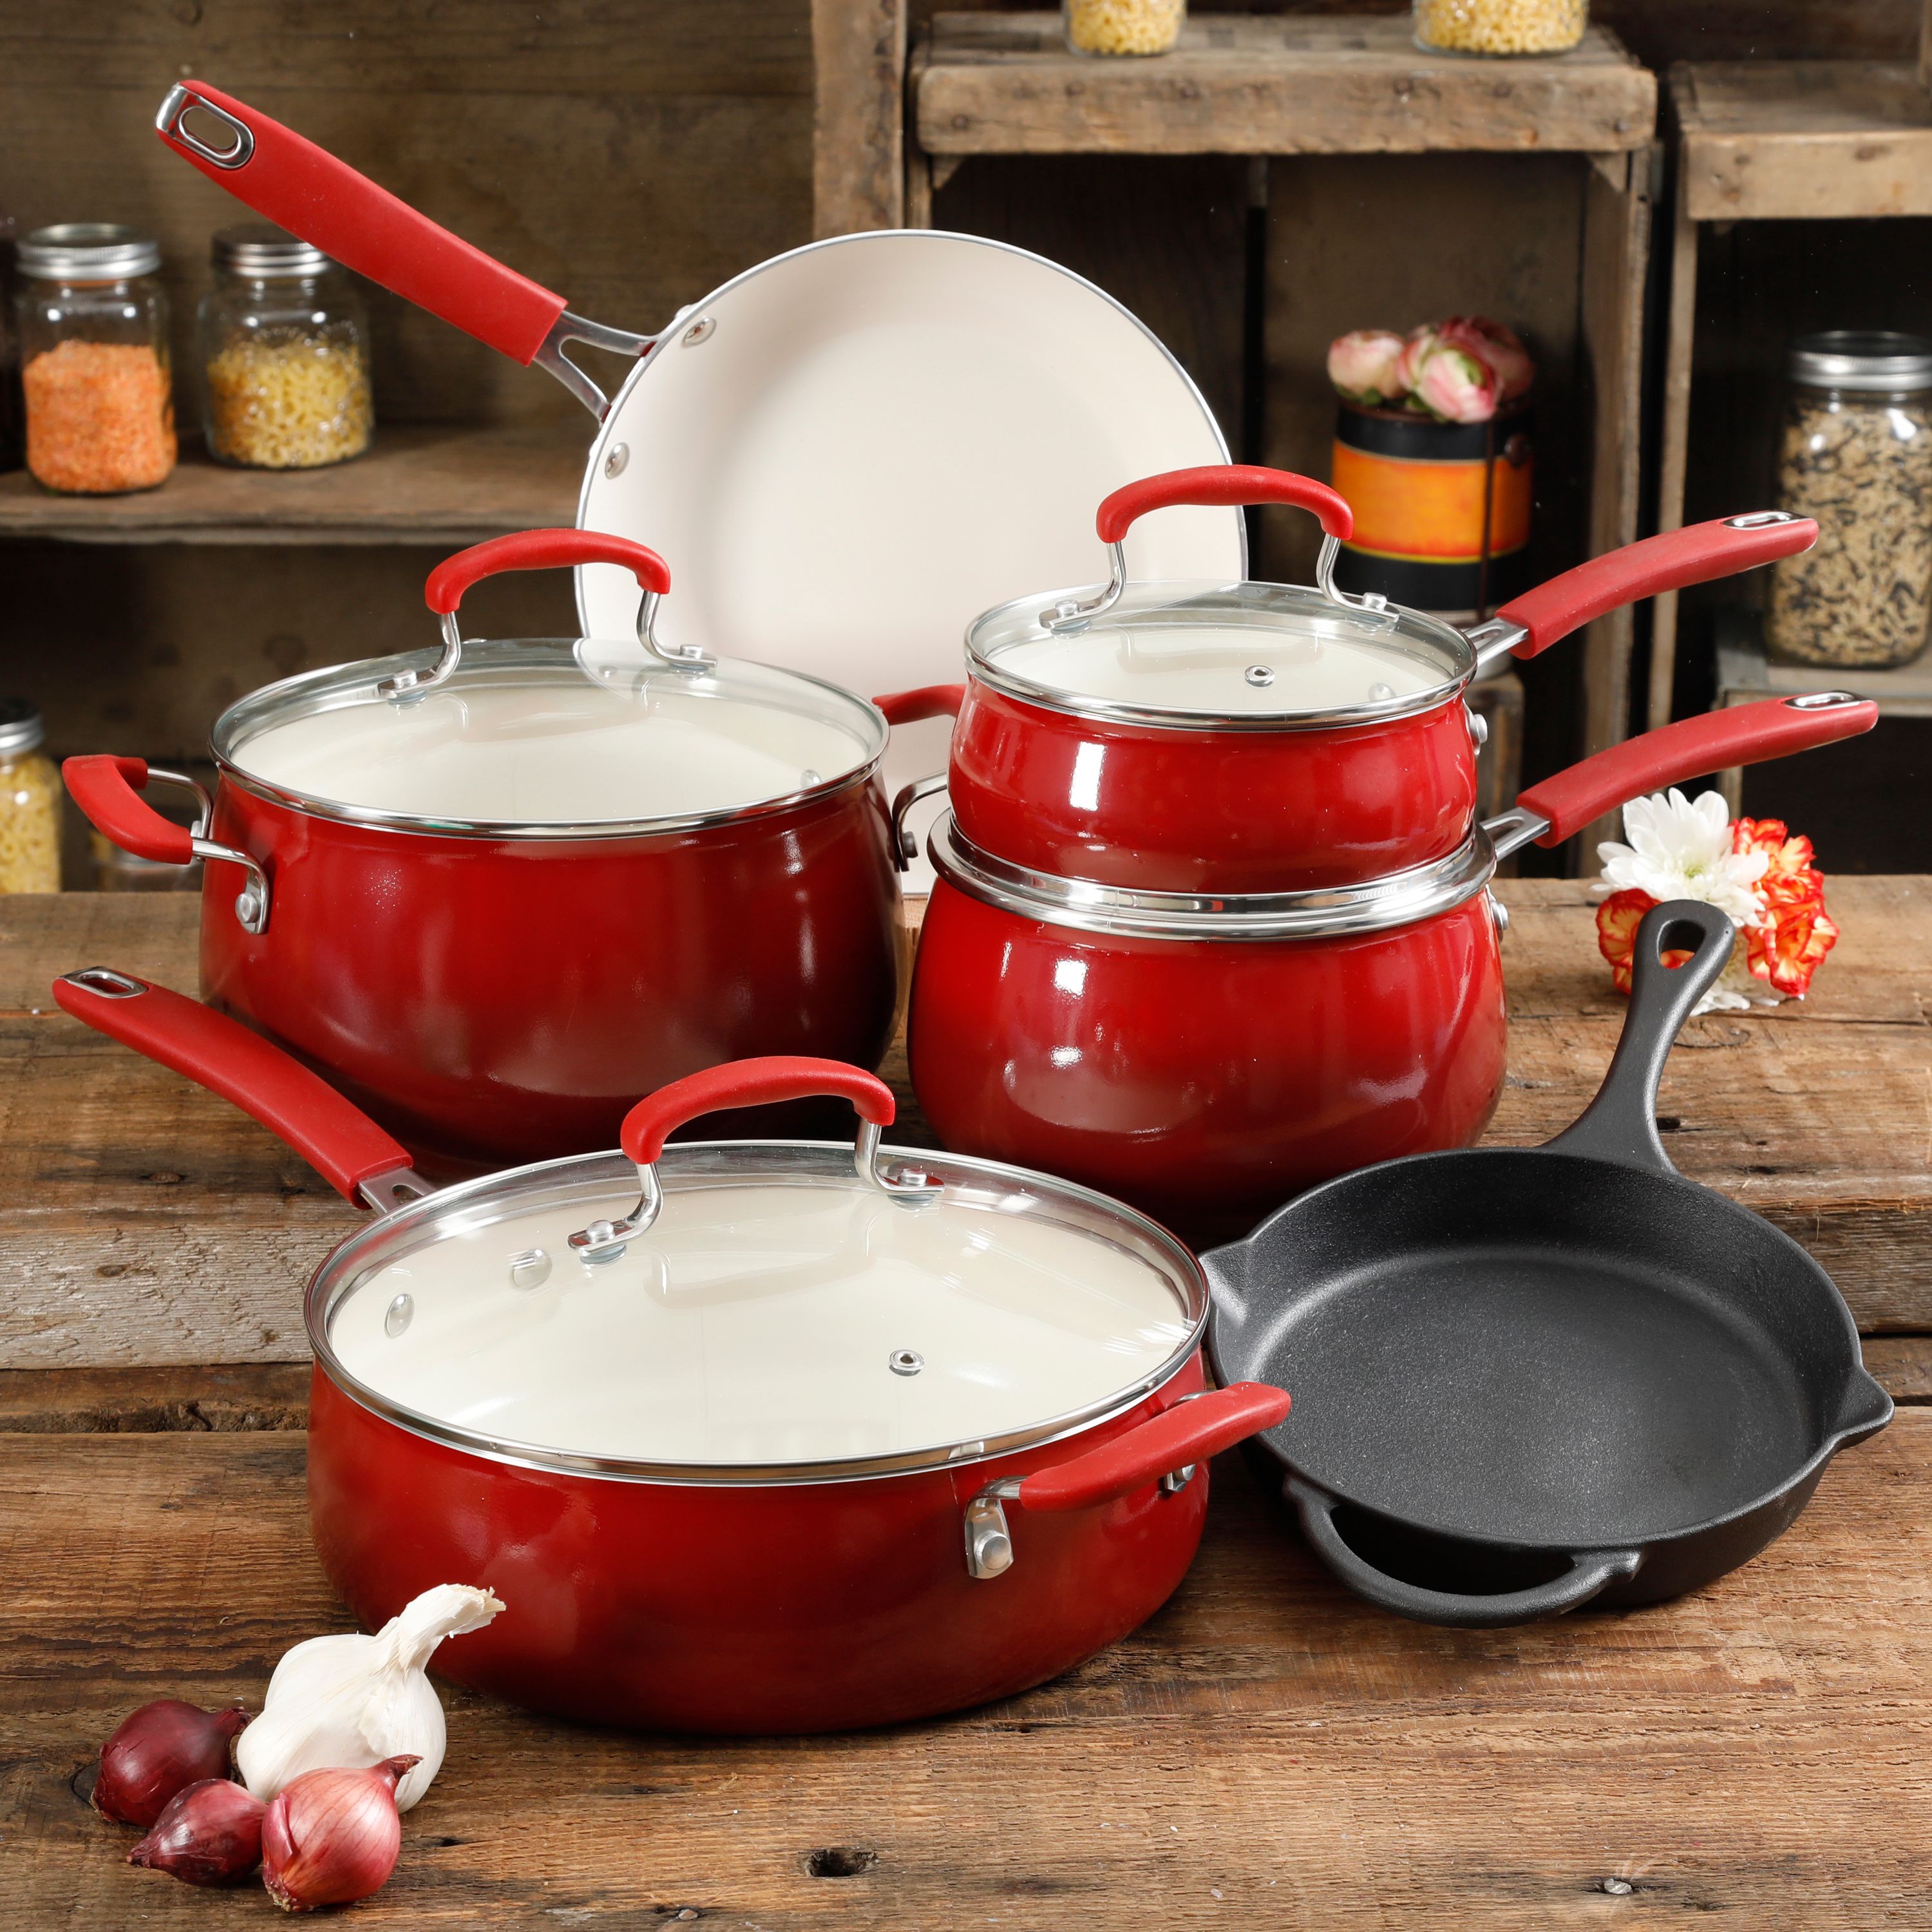 The Pioneer Woman Classic Belly 10 Piece Ceramic Non-stick and Cast Iron Cookware Set, Red - image 1 of 9